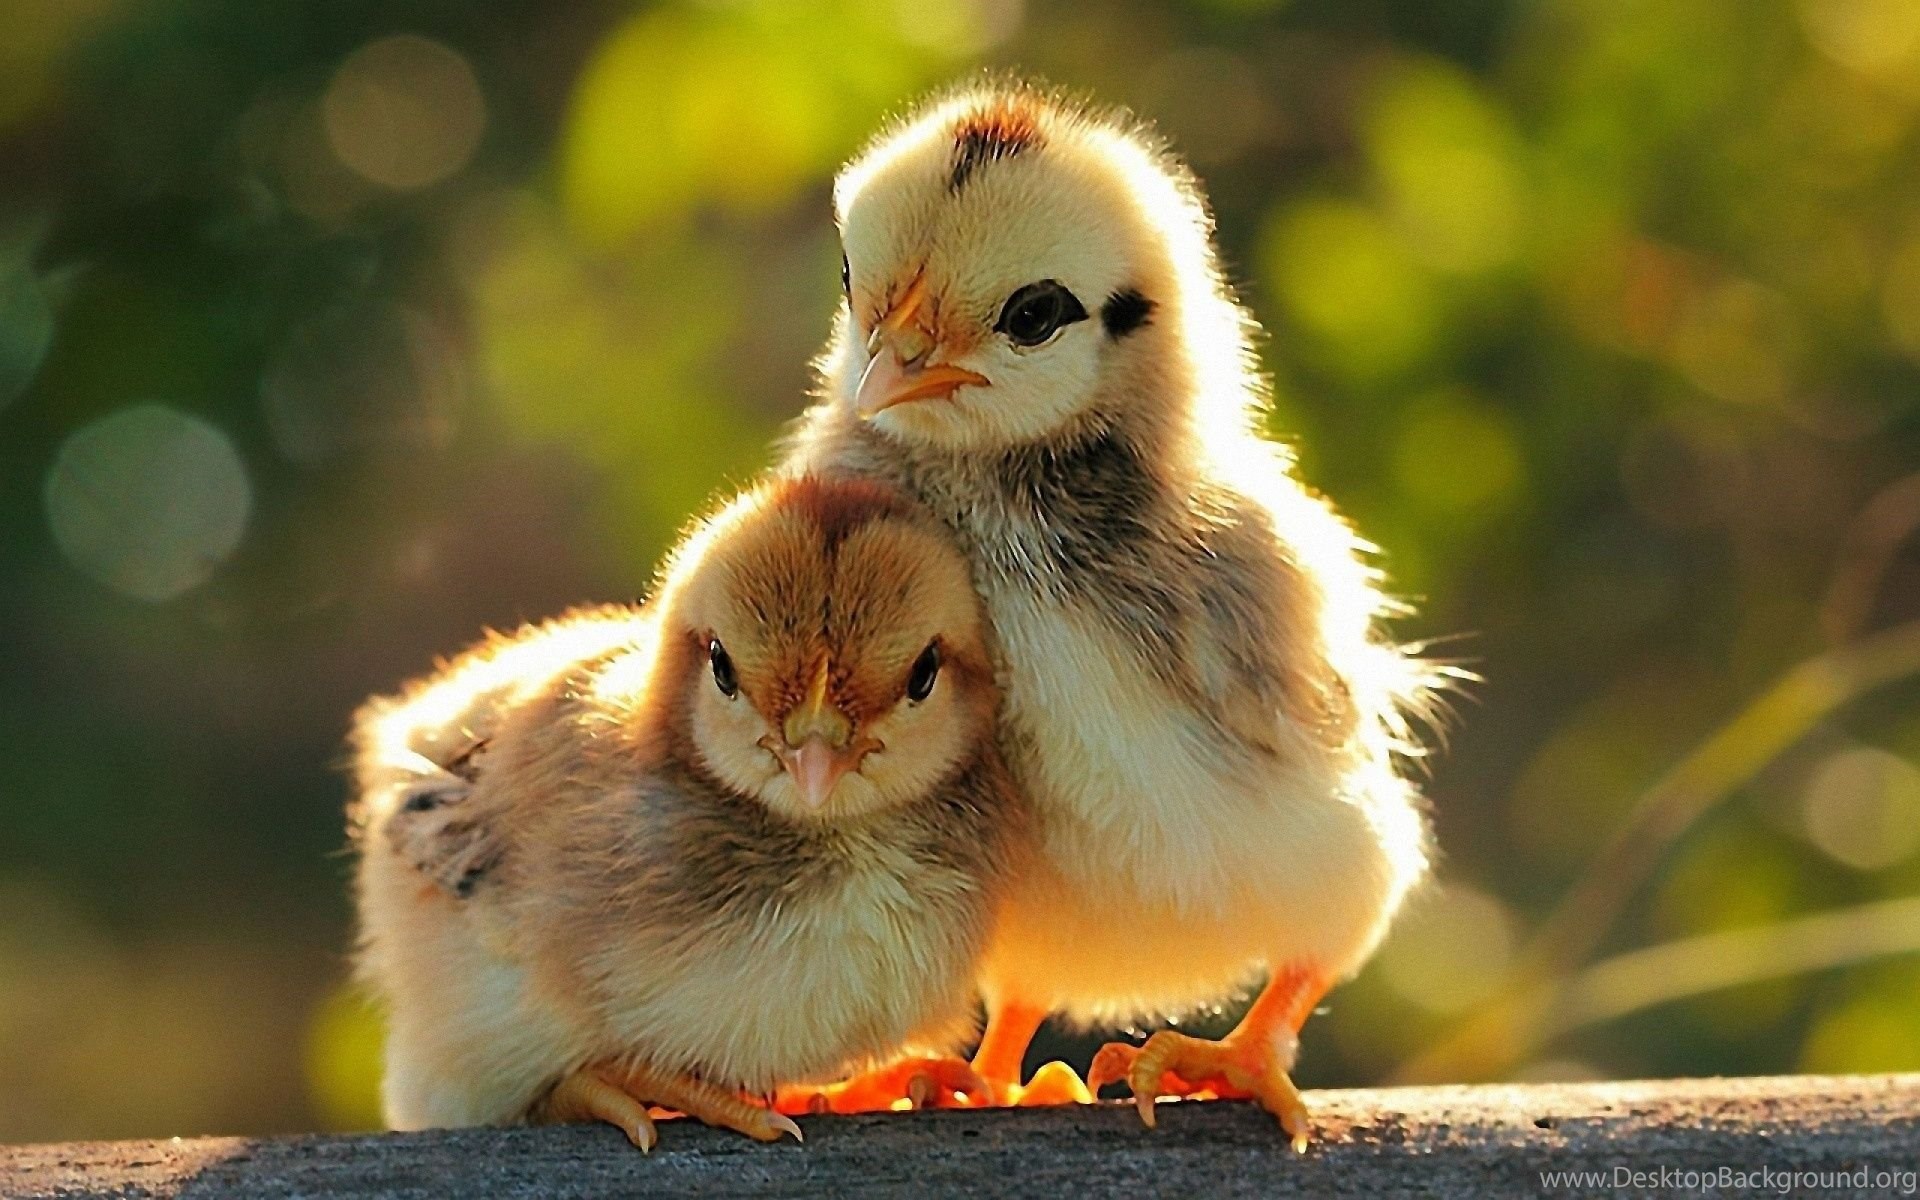 Pics, Facts, Funny Stuff About Animals & Nature Chicken Wallpaper Desktop Background